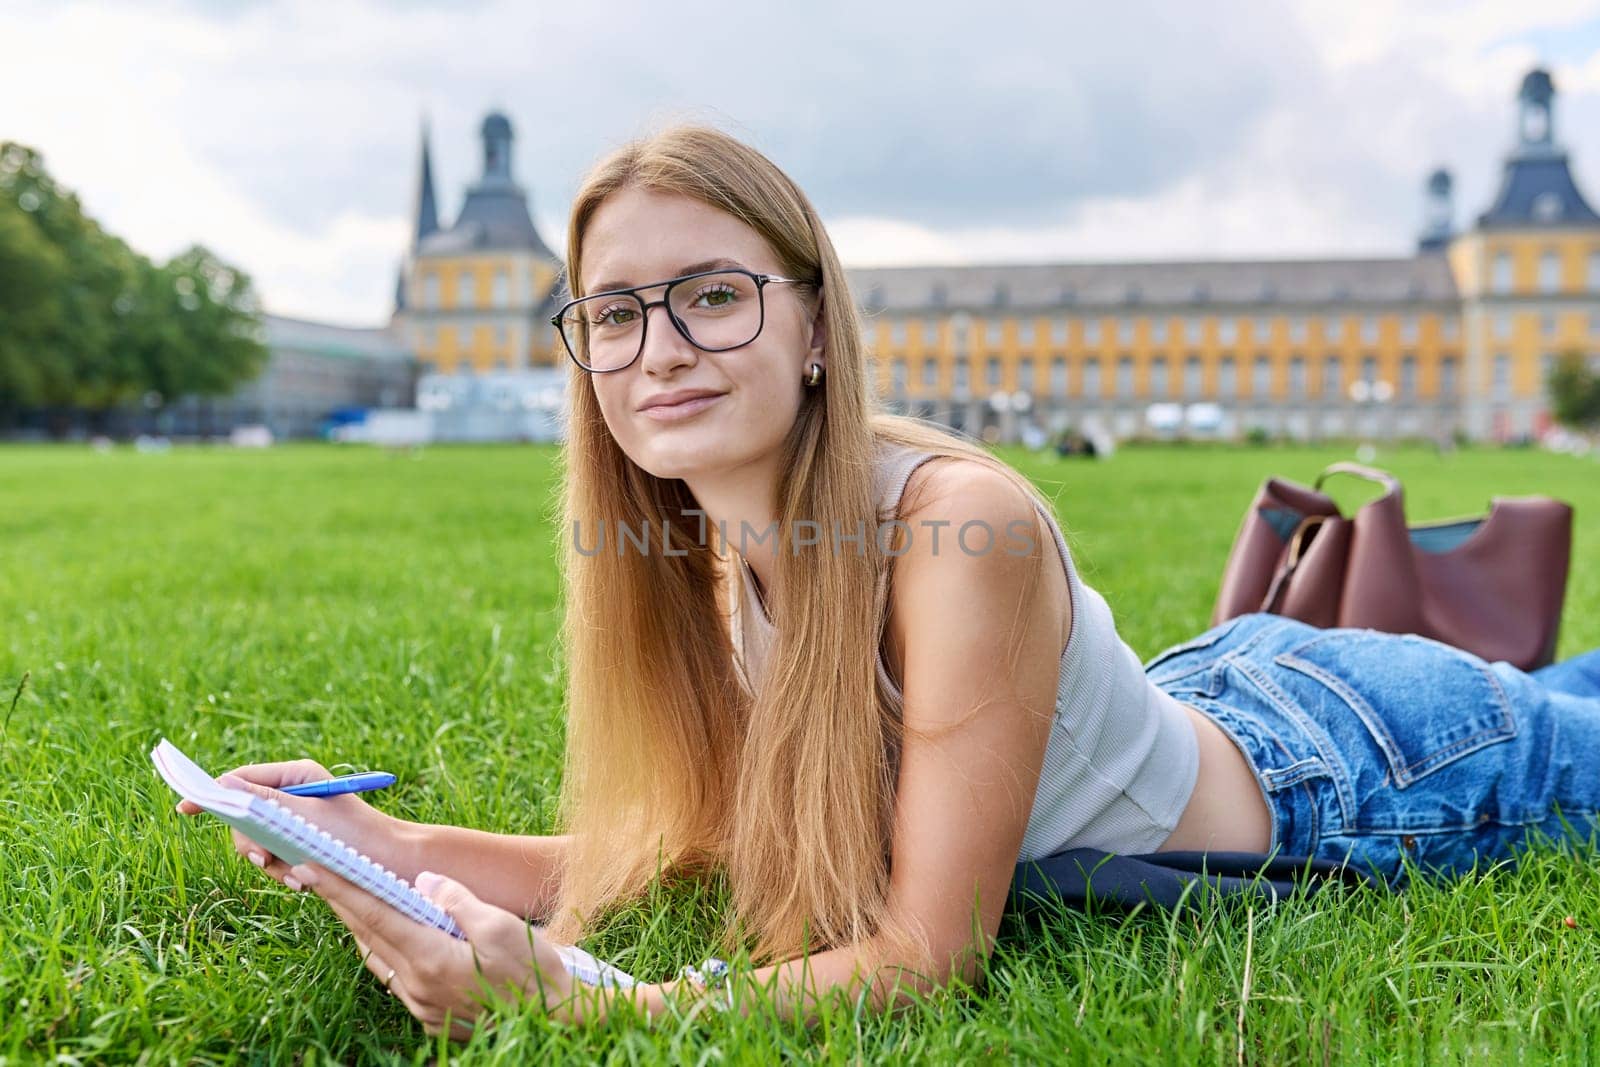 Portrait of young teenage girl student lying on lawn on grass, with textbook notebook, looking at camera, educational building background. Youth, education, college university concept